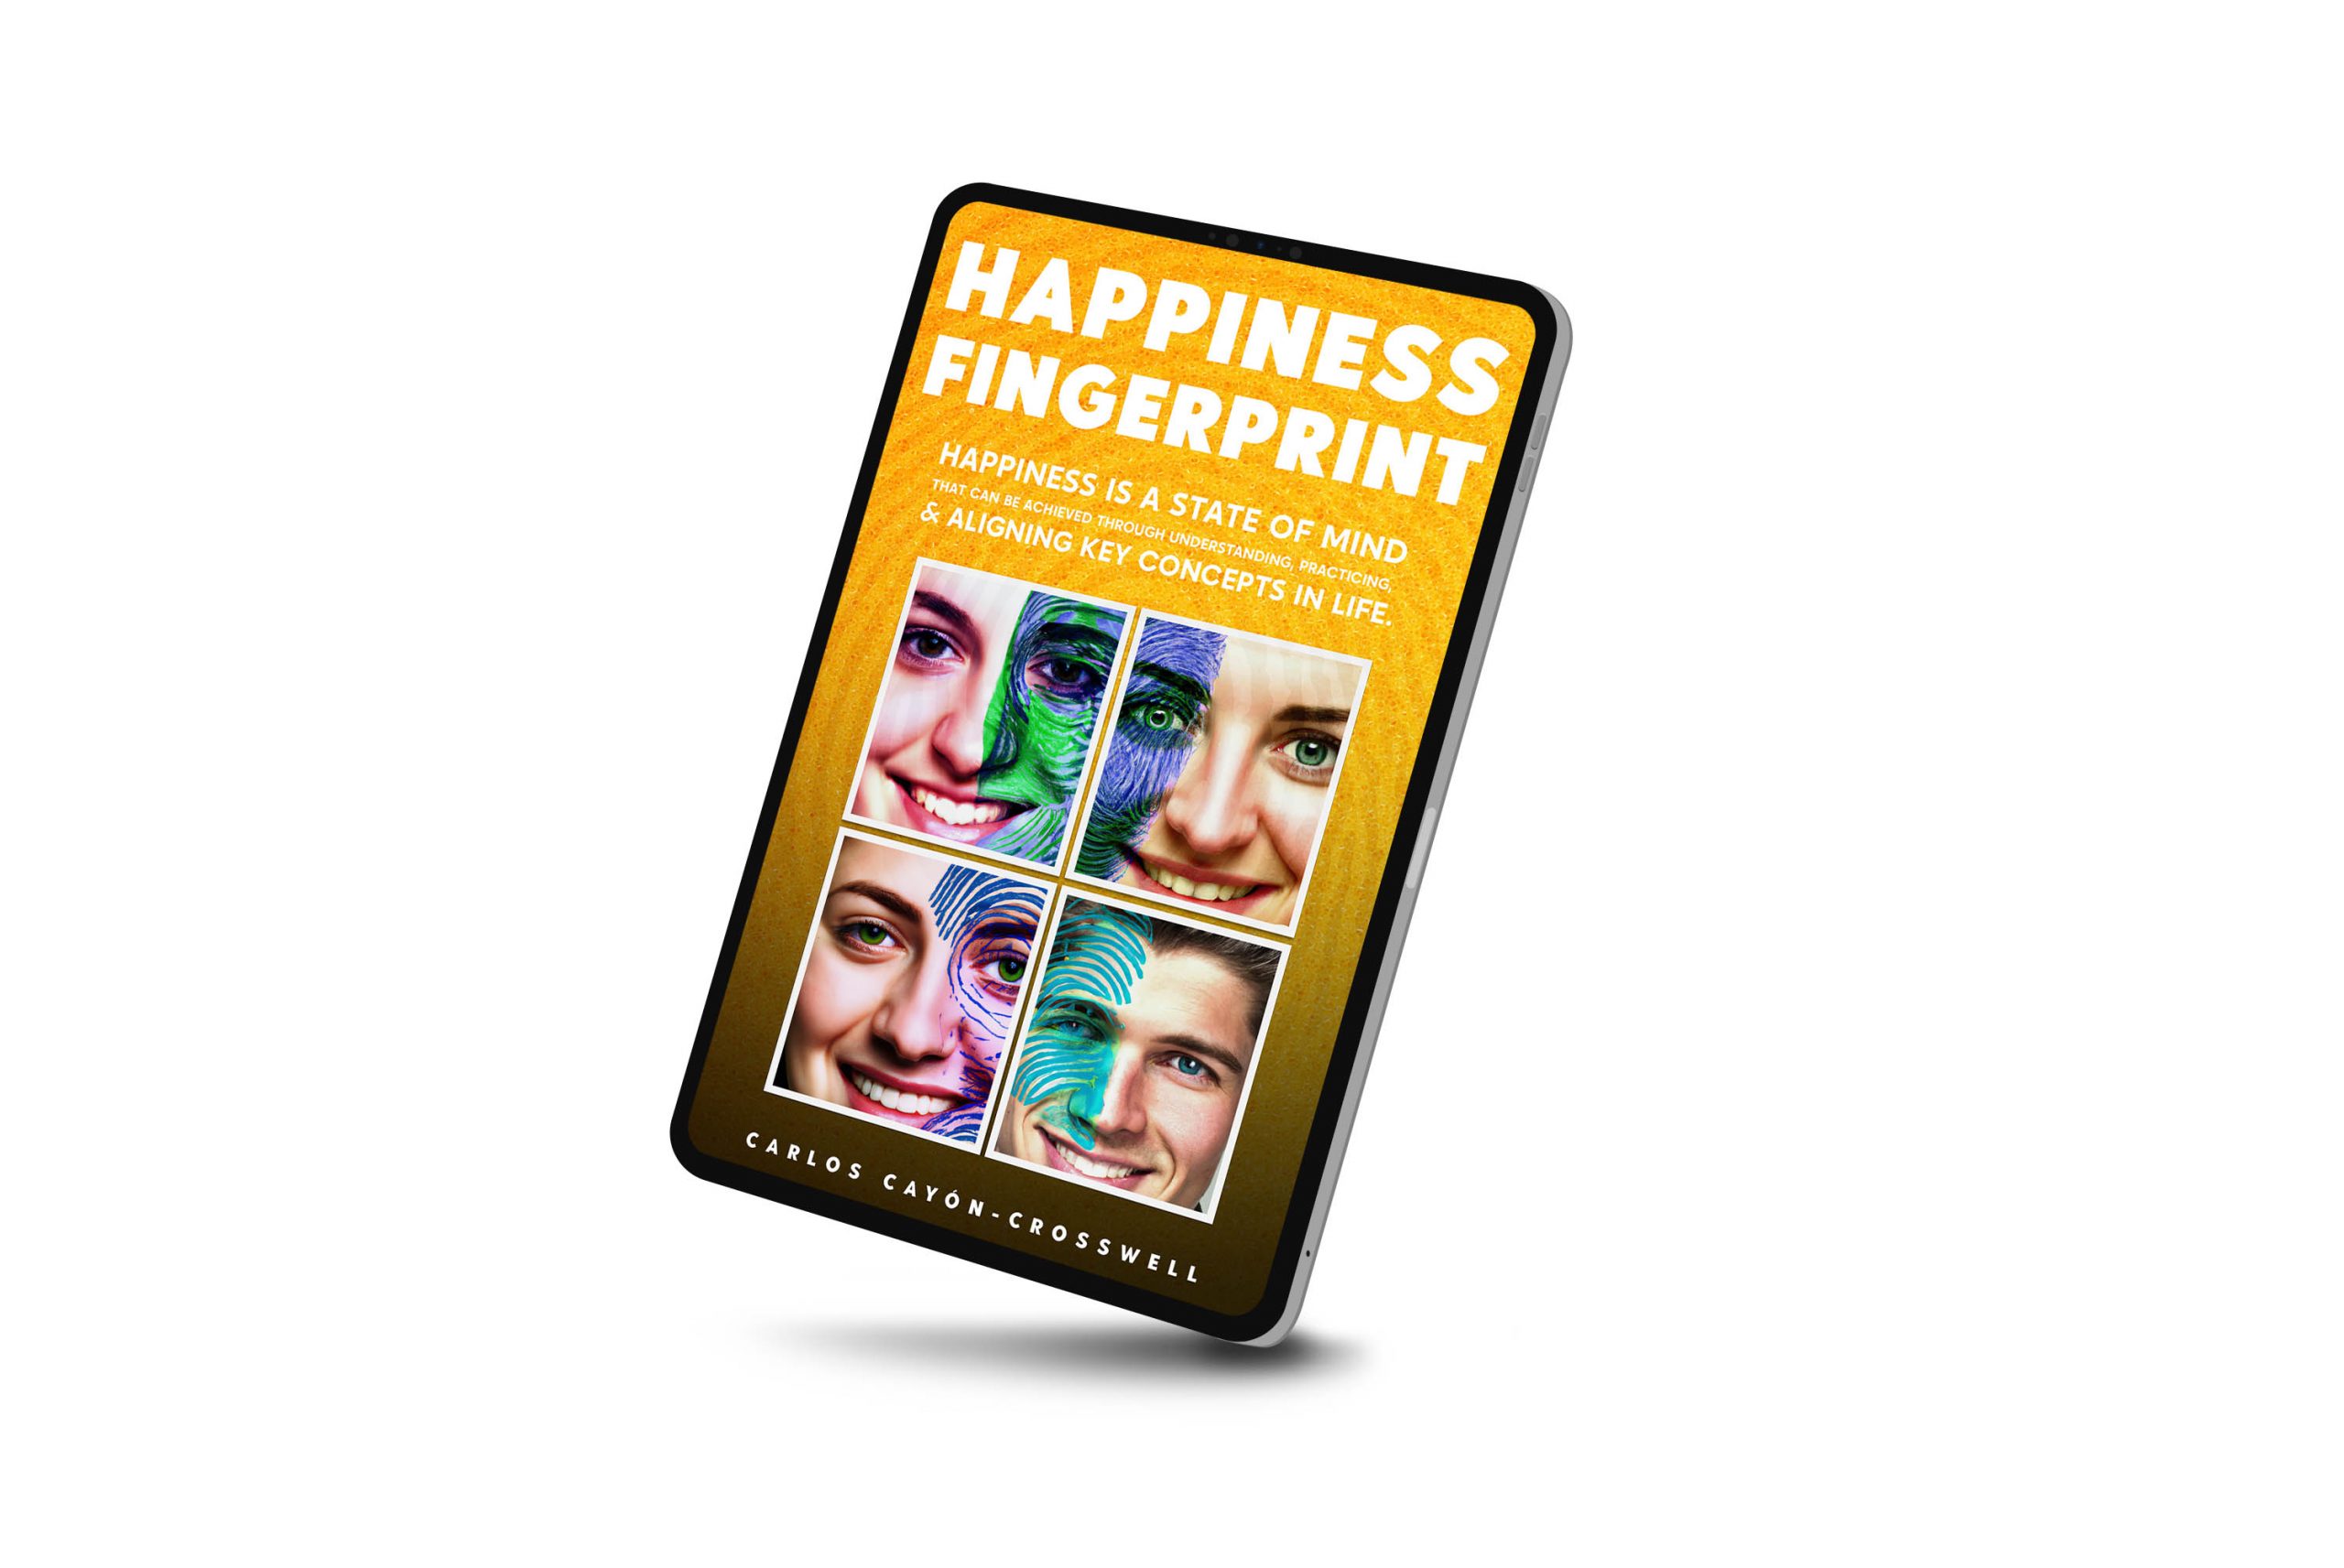 Happiness Fingerprint by Carlos Cayon-Crosswell